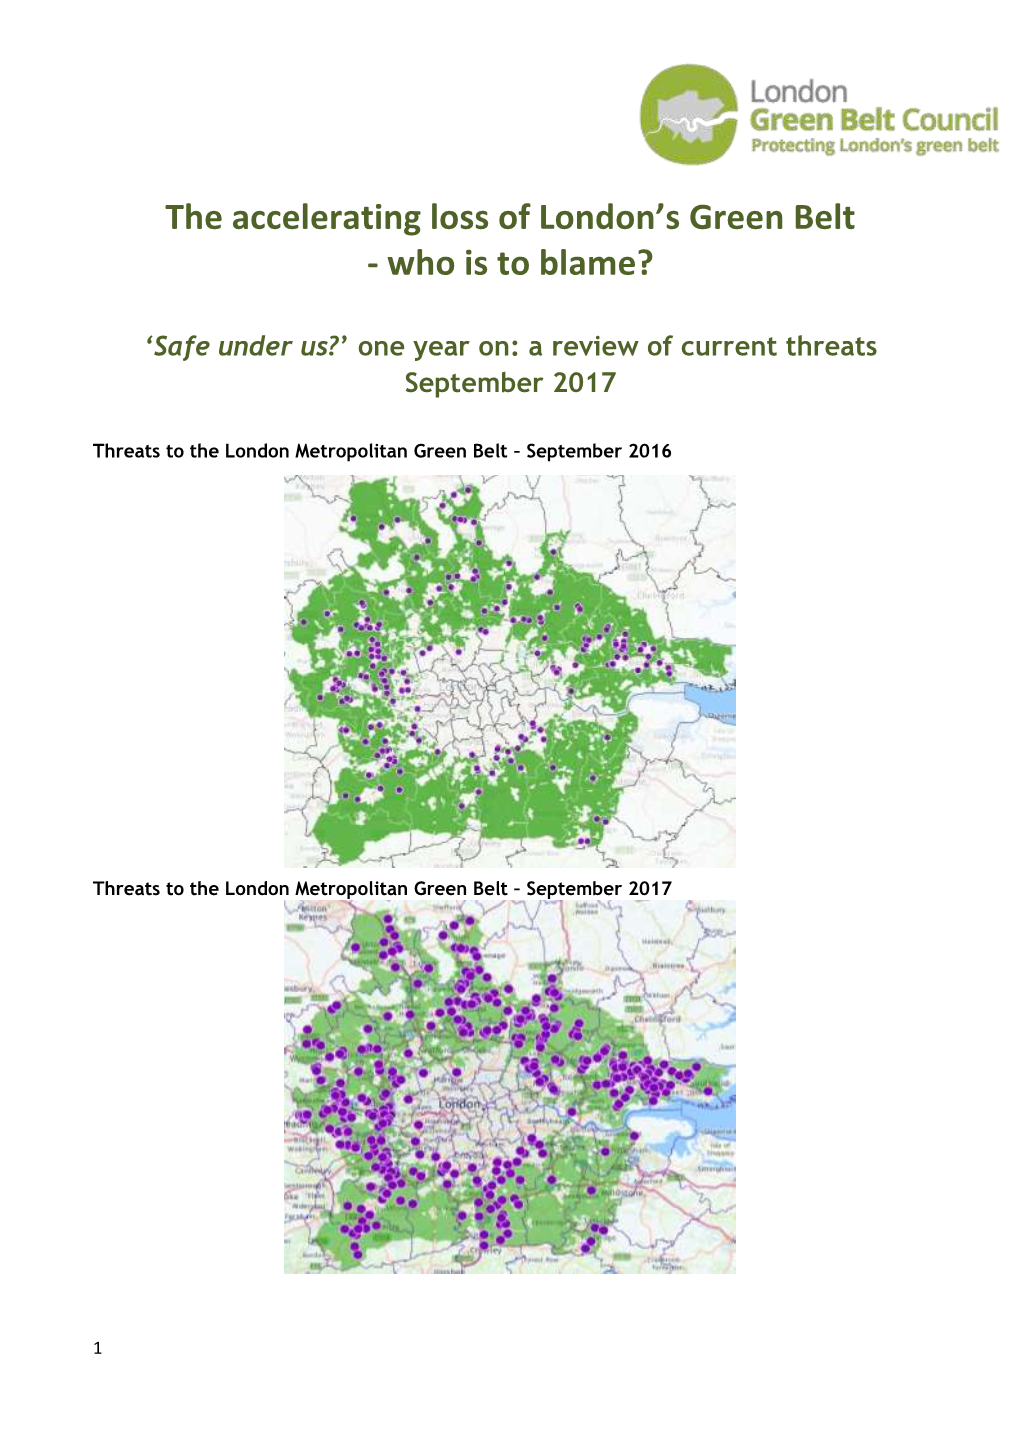 The Accelerating Loss of London's Green Belt